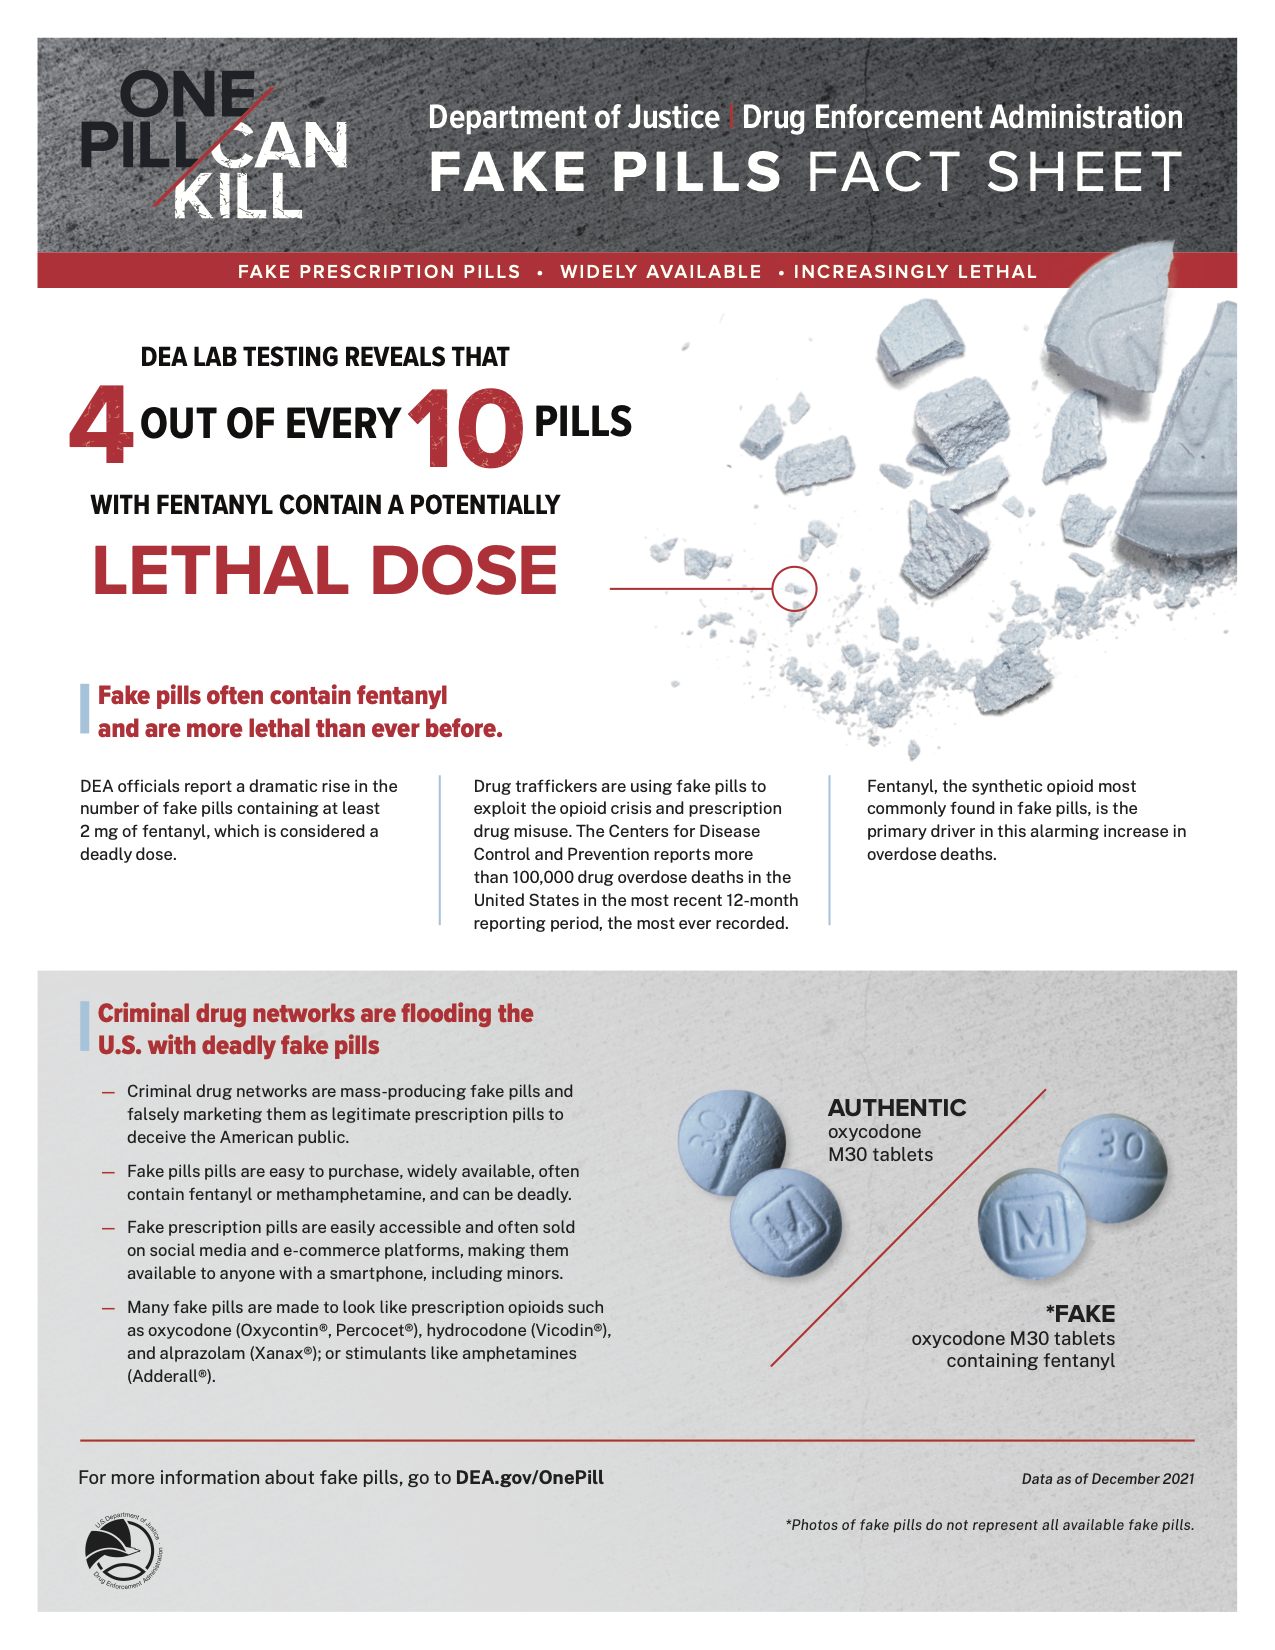 DEA fake pills fact sheet - 40 percent of these pills have a lethal dose of fentanyl